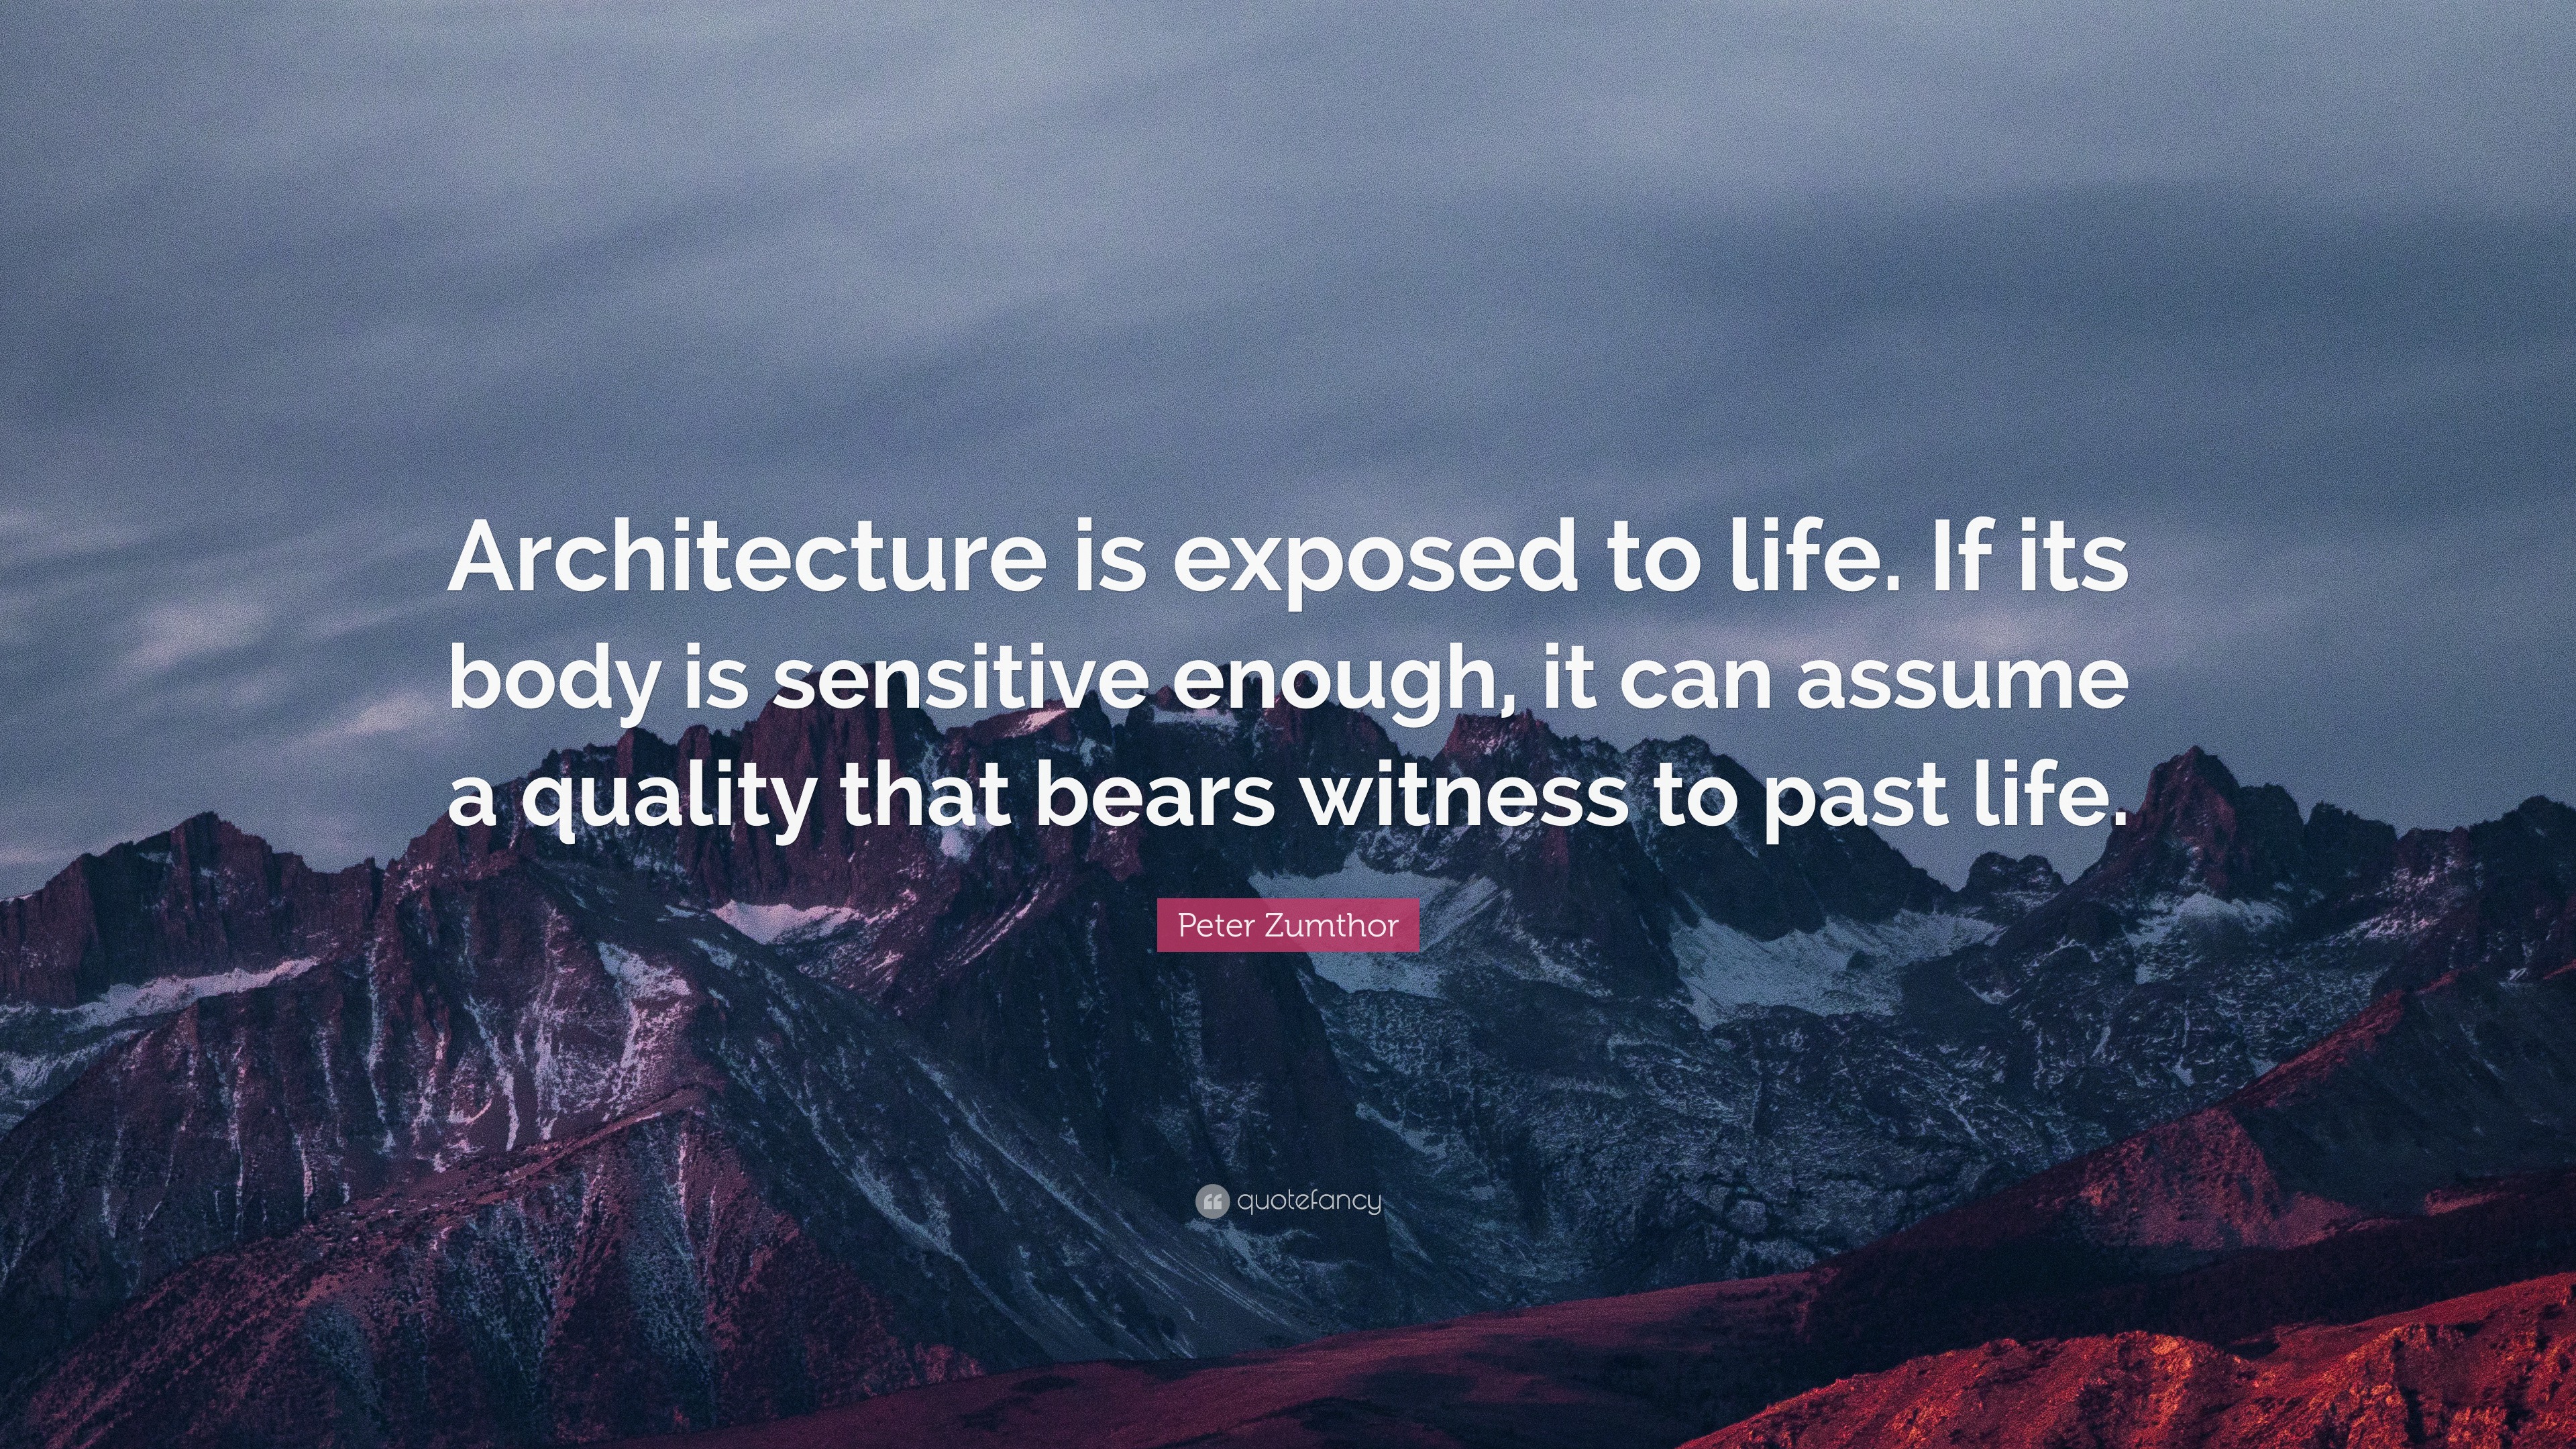 Peter Zumthor Quote: “Architecture is exposed to life. If its body is ...